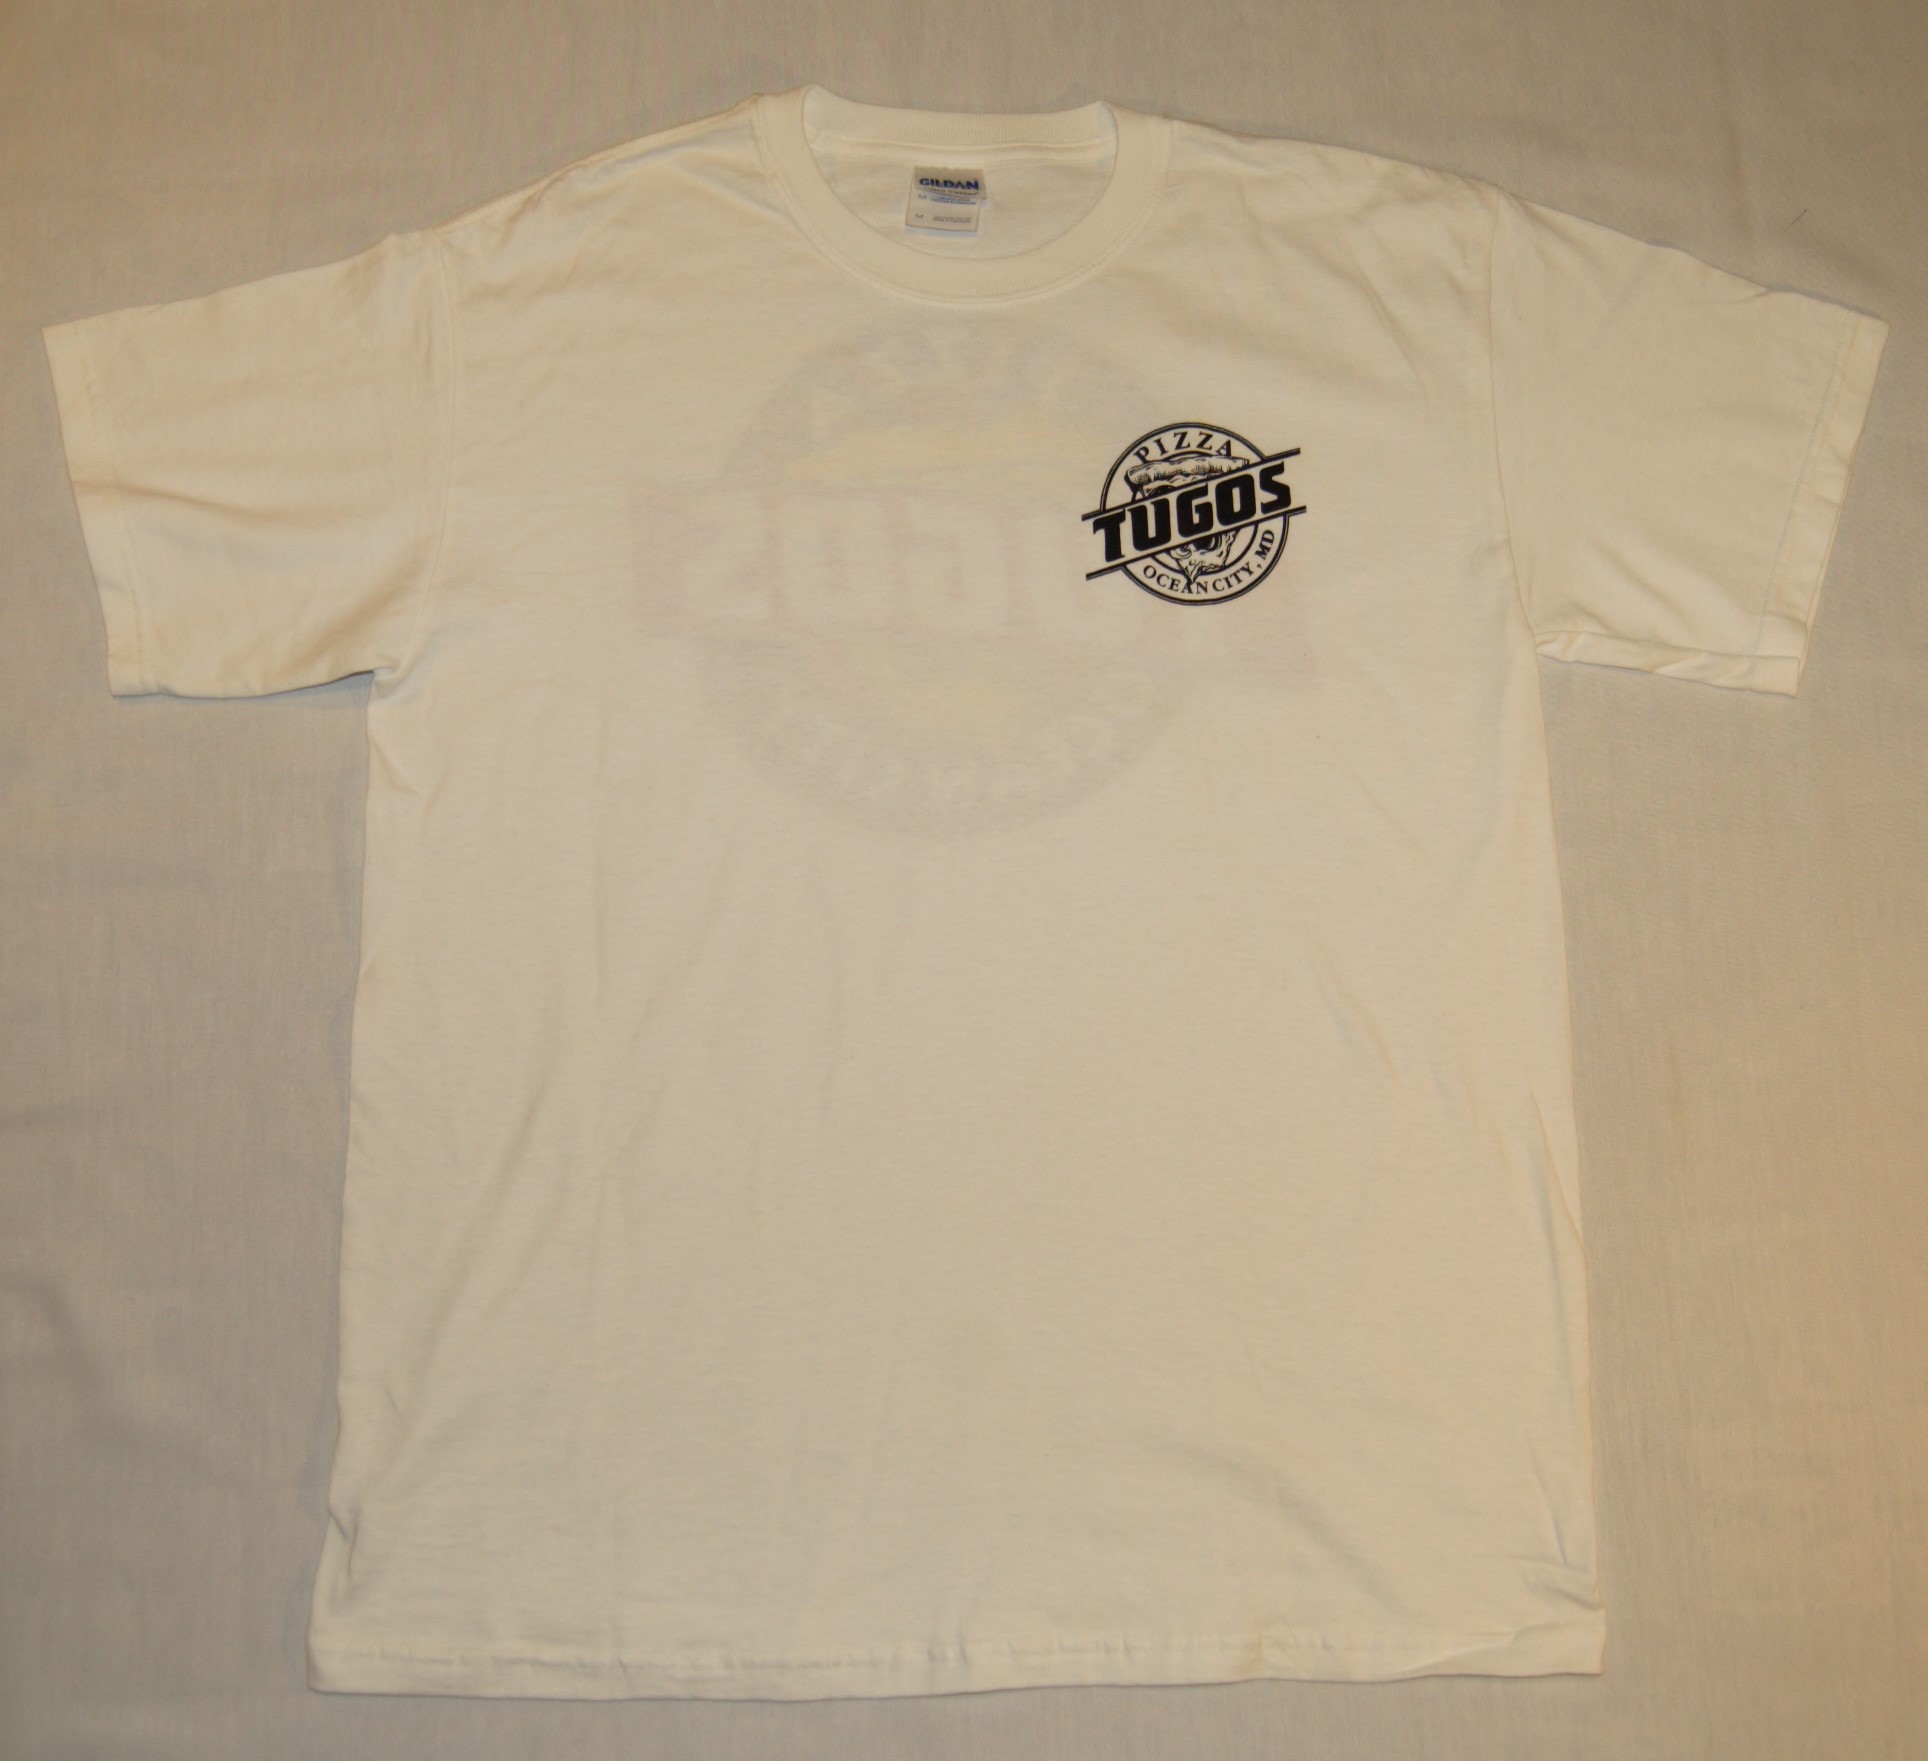 Tugos Classic Shirt Front